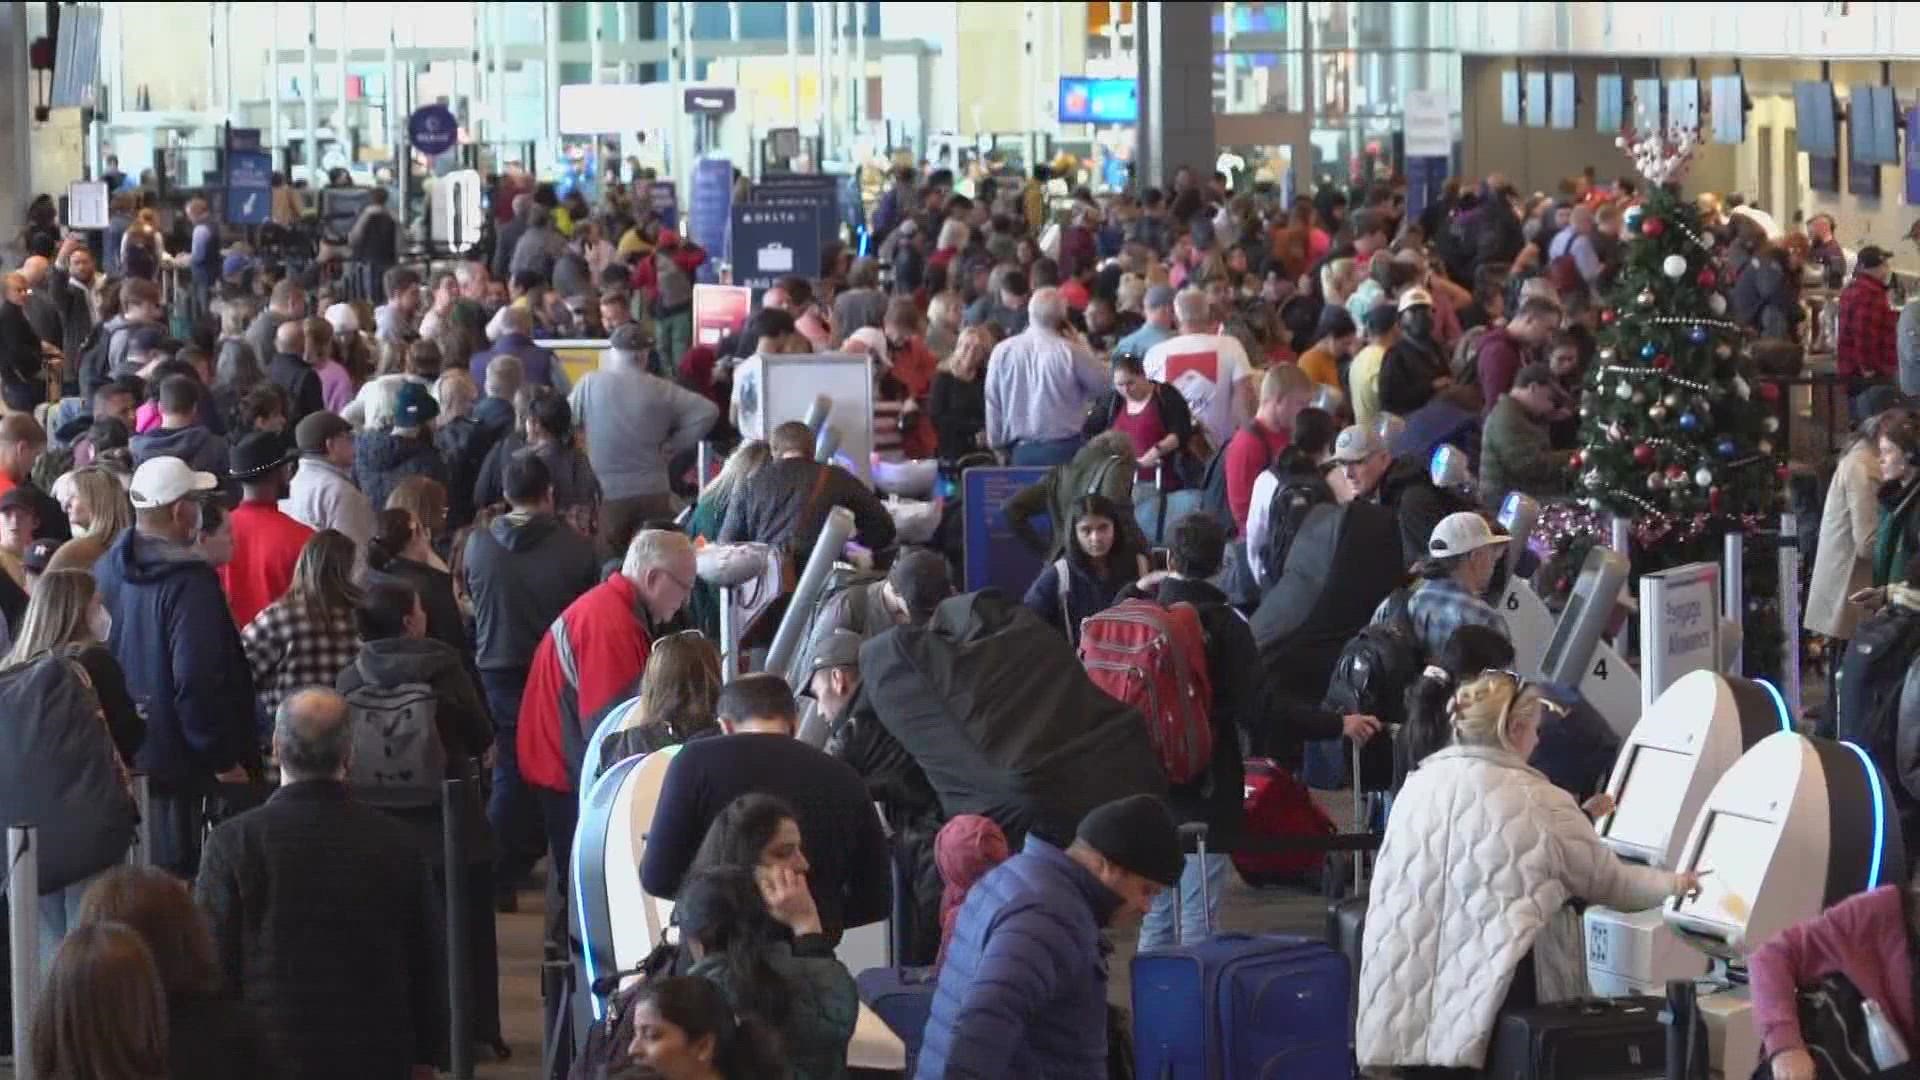 Thousands of passengers are stranded nationwide, including at Austin's airport, as Southwest cancellations mean few options to get home. Many are without luggage.